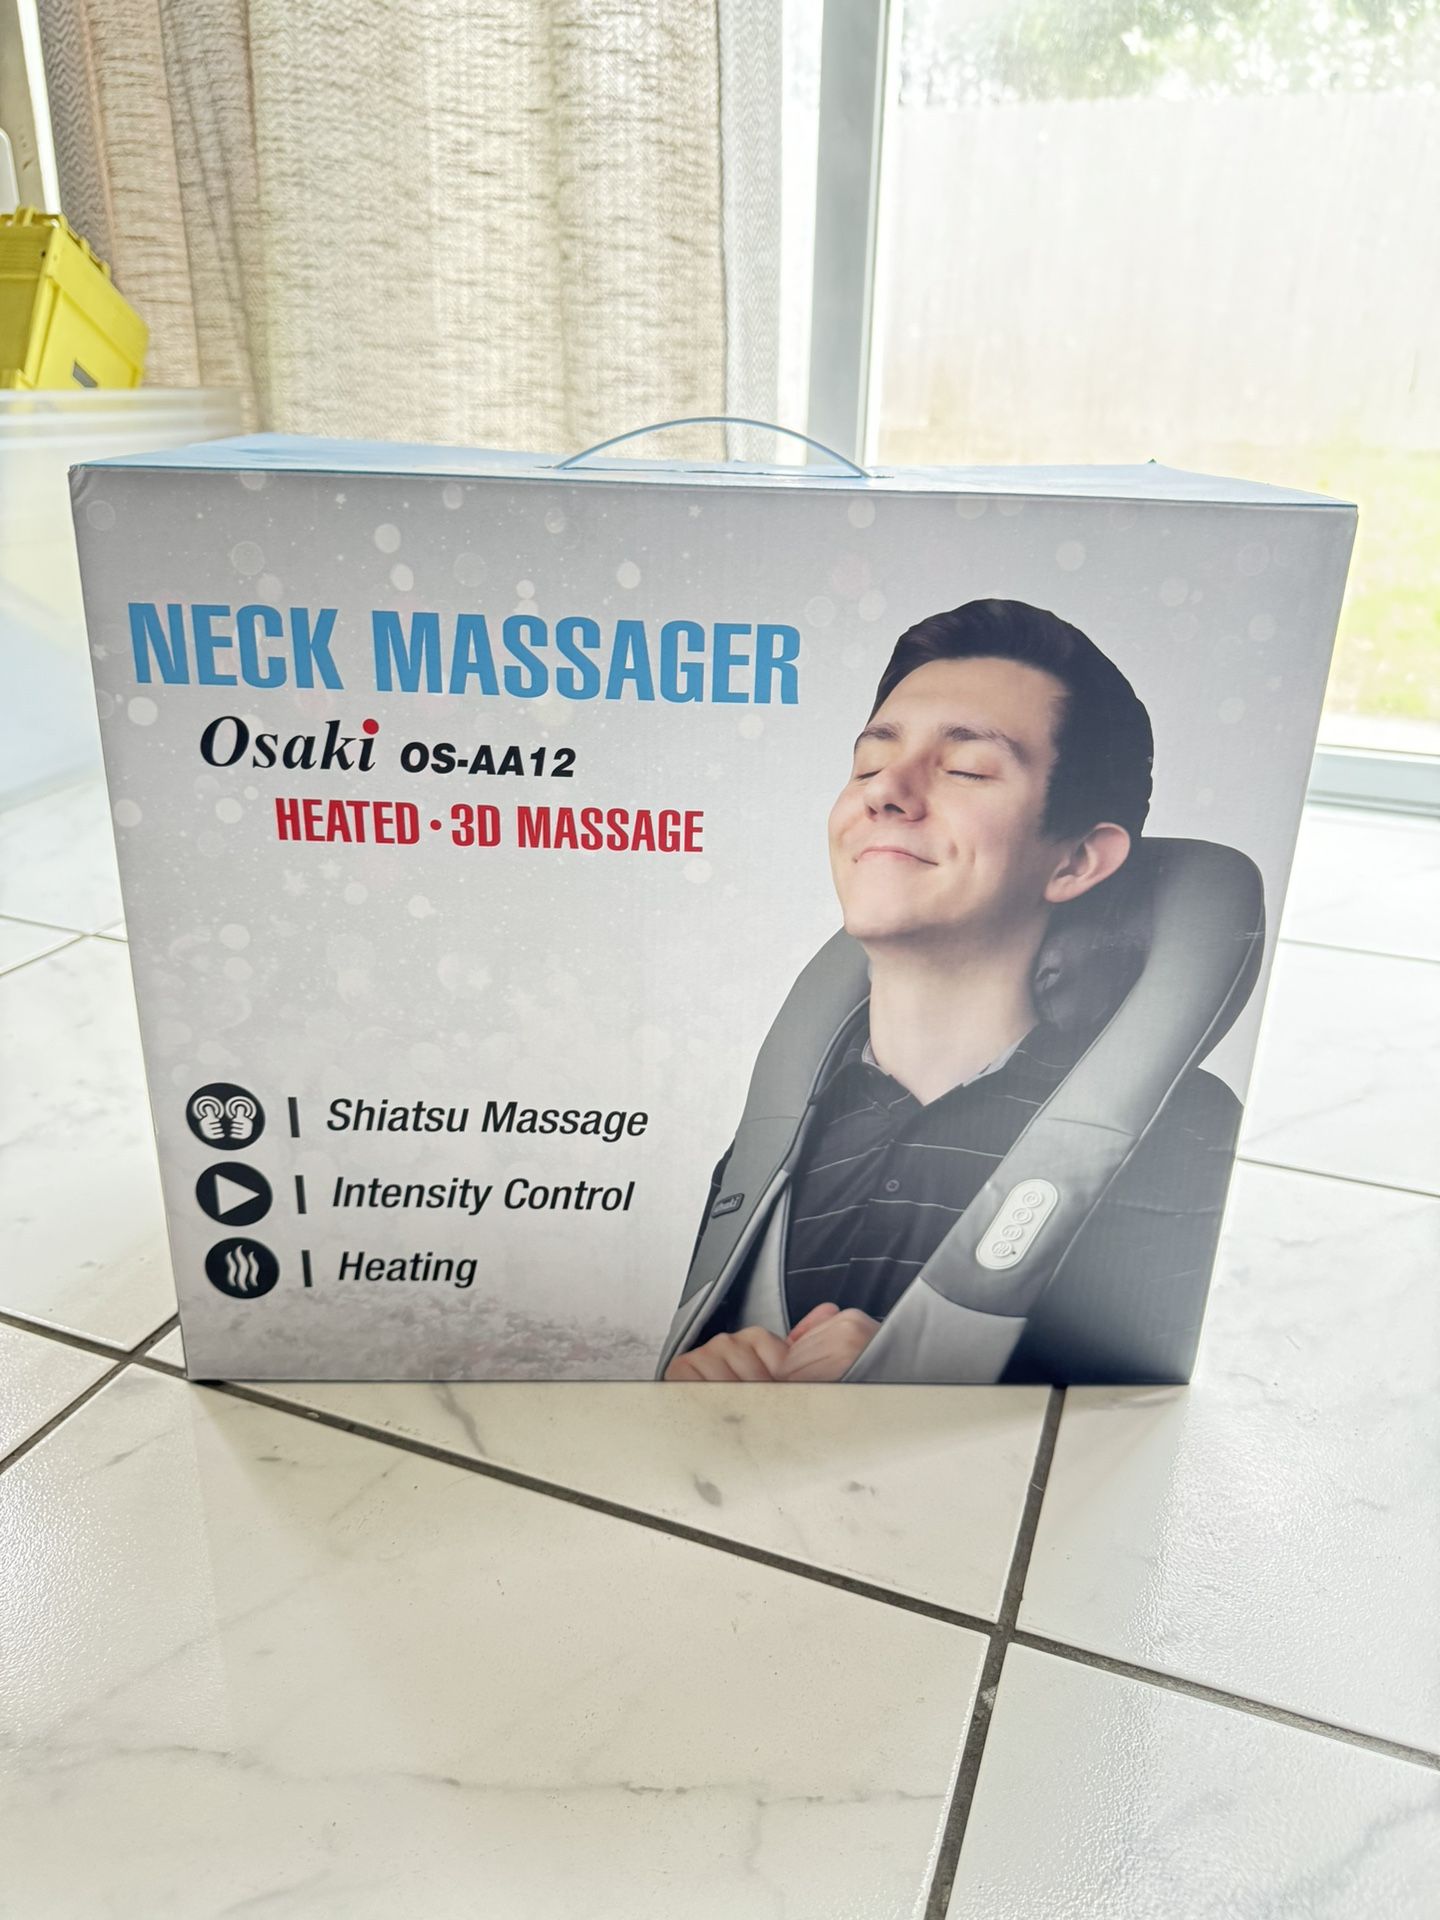 $30 - New Neck Massager In Box